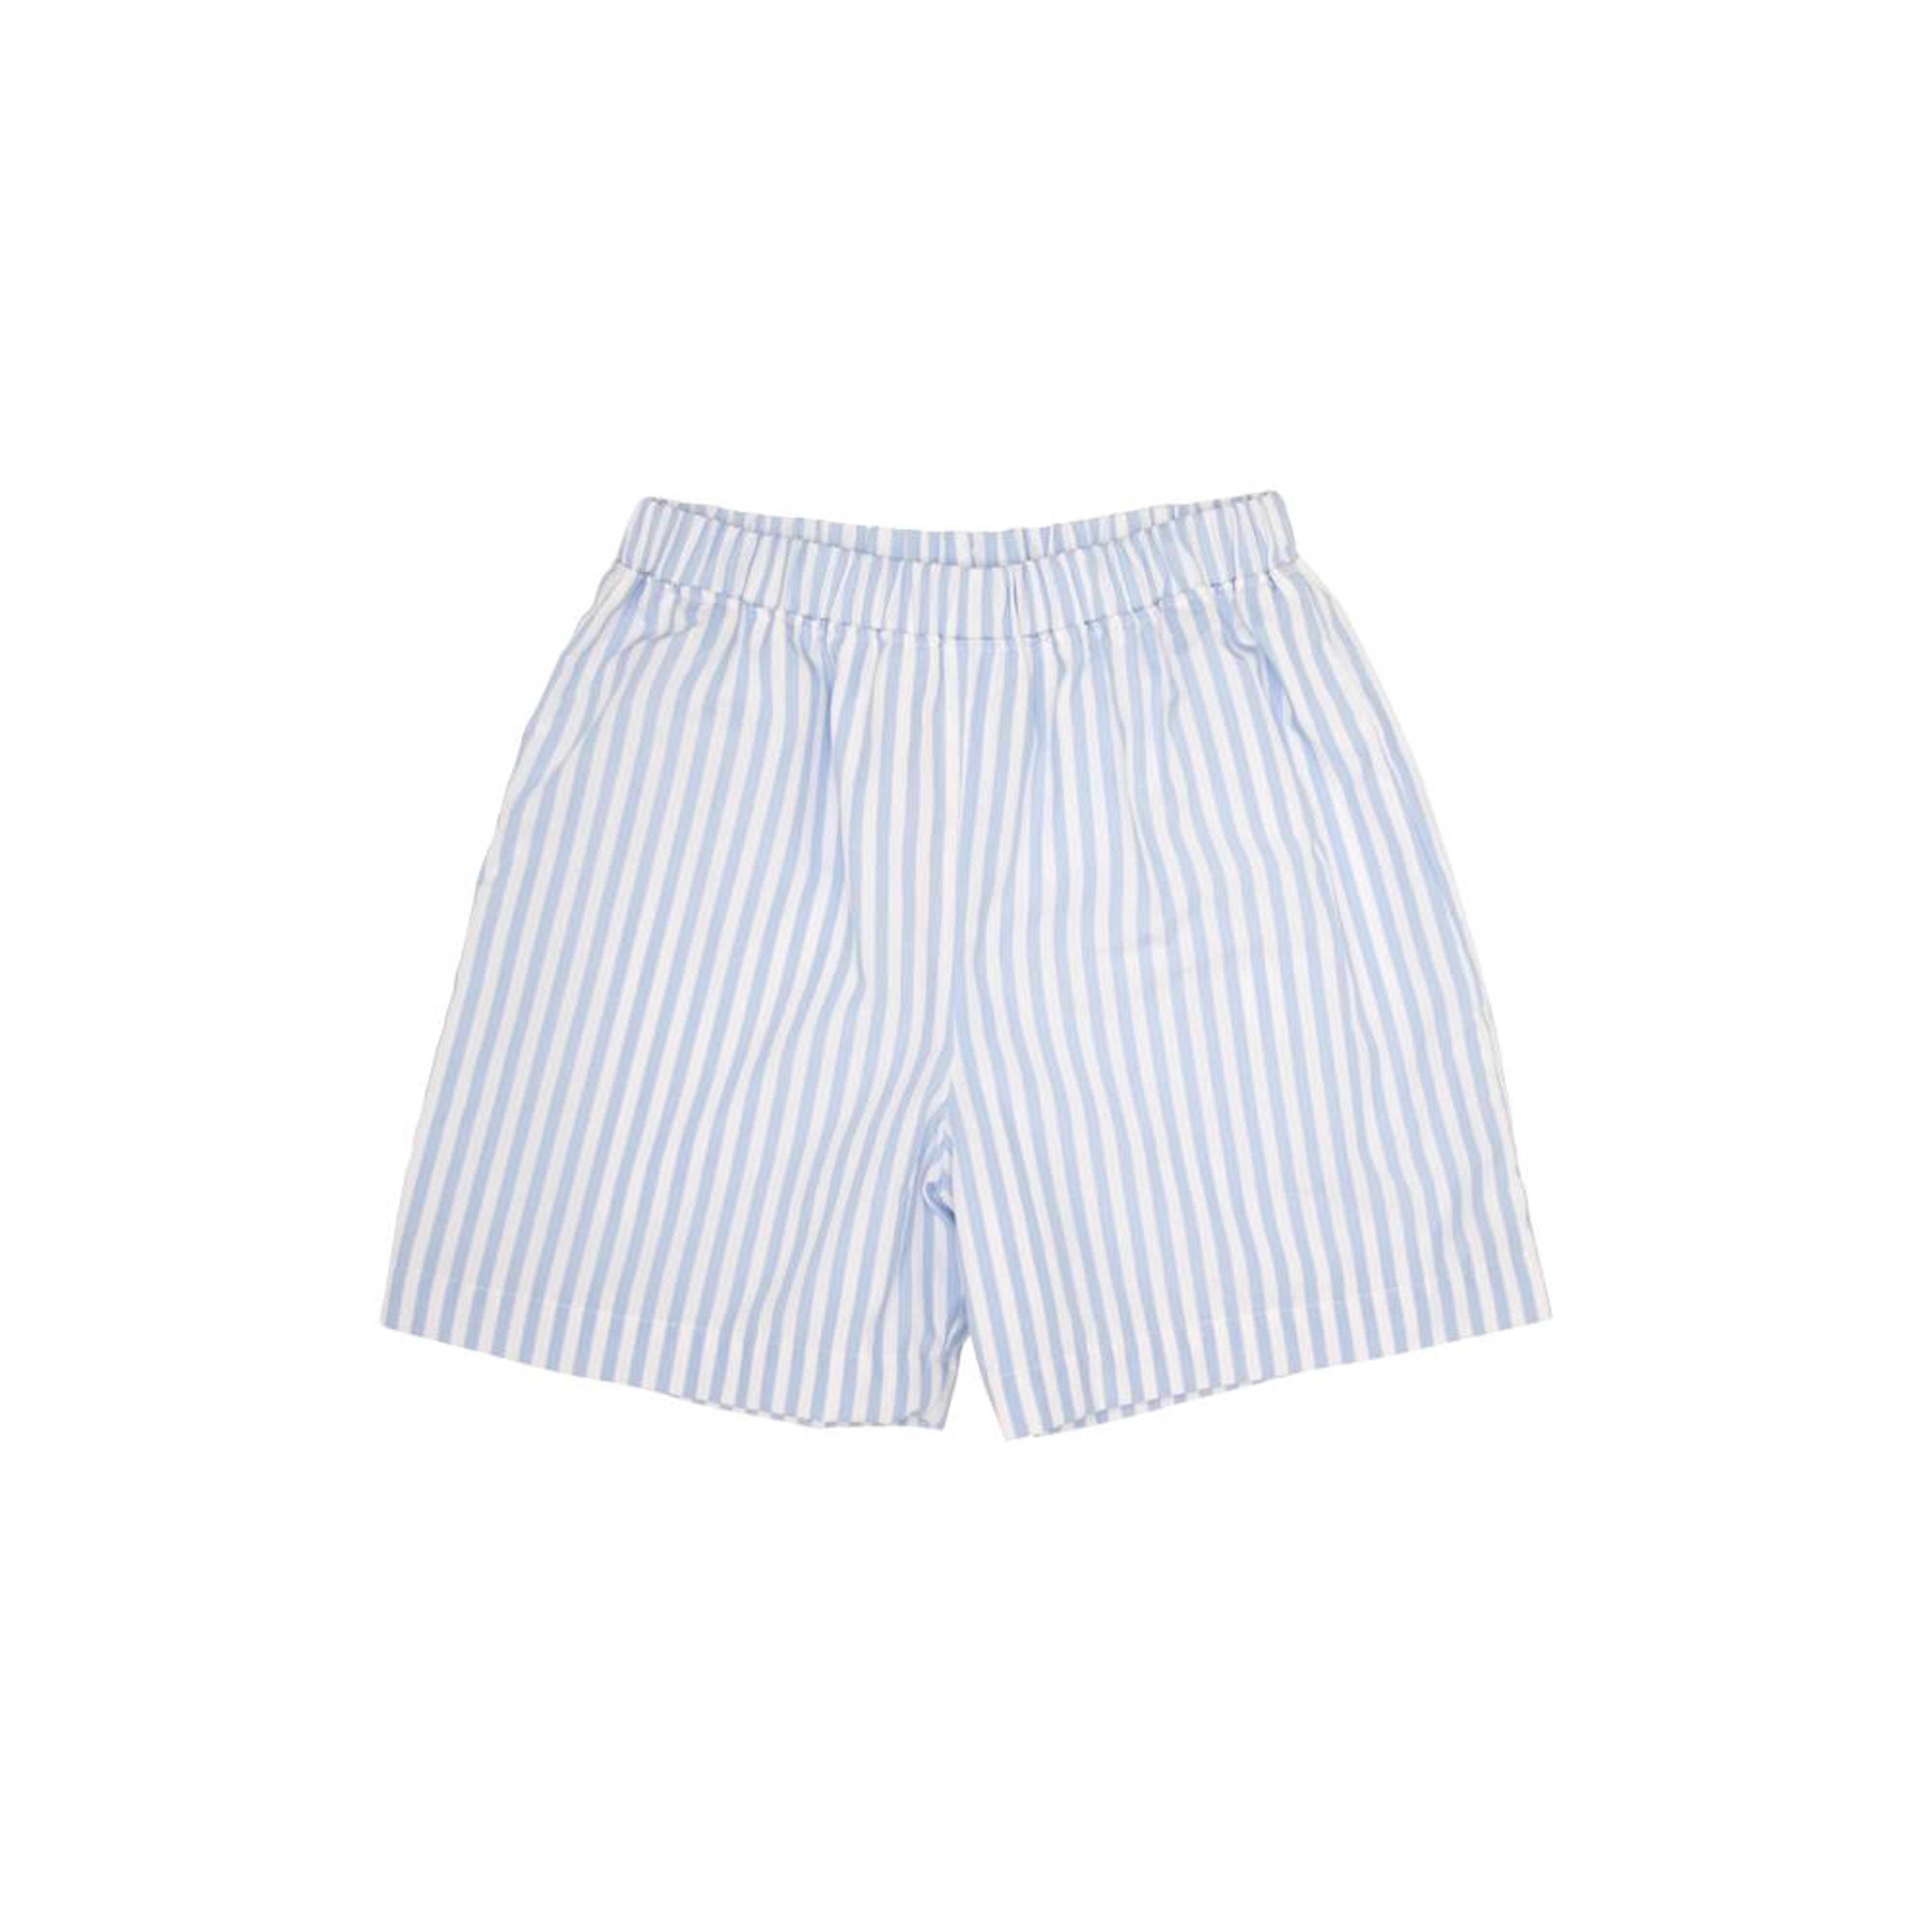 The Beaufort Bonnet Company - Shelton Shorts Boone Blue Stripe With ...